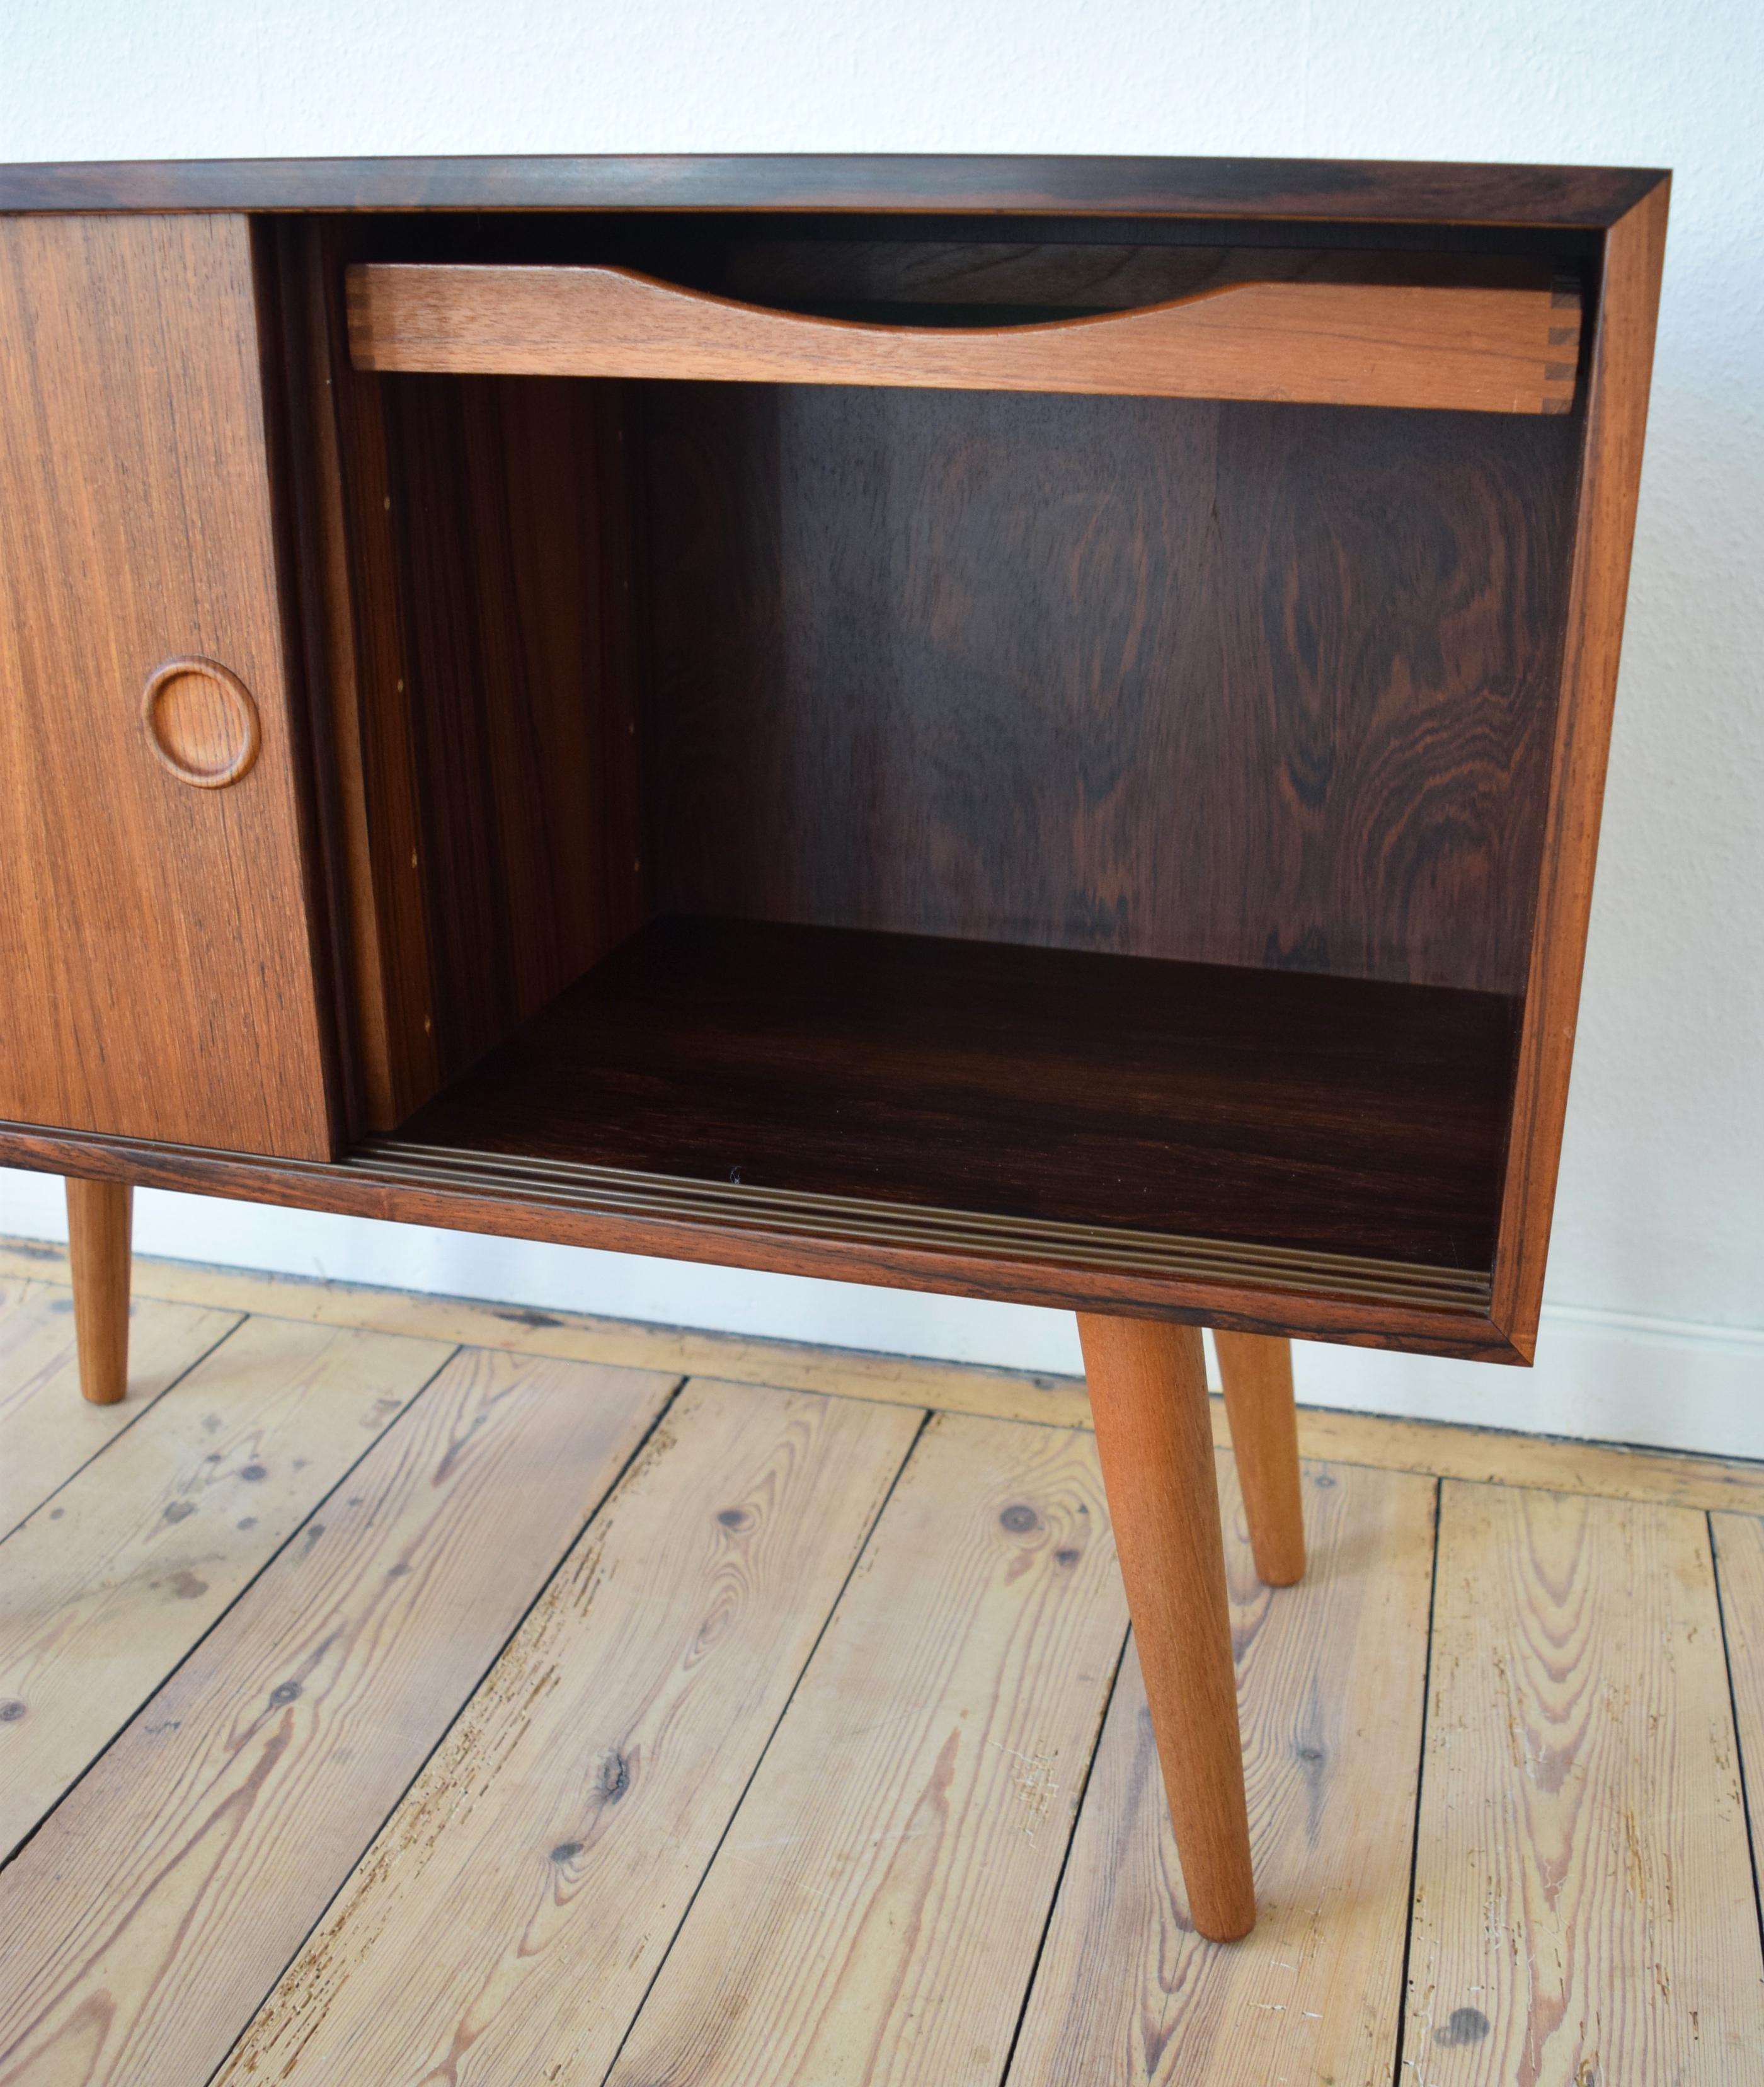 Rosewood cabinet designed by Kai Kristiansen for Feldballes Møbelfabrik in Denmark in the 1960s. Features two sliding doors with inlayed handles. Adjustable interior shelf which fit both compartments and felt lined drawer. The unit has been